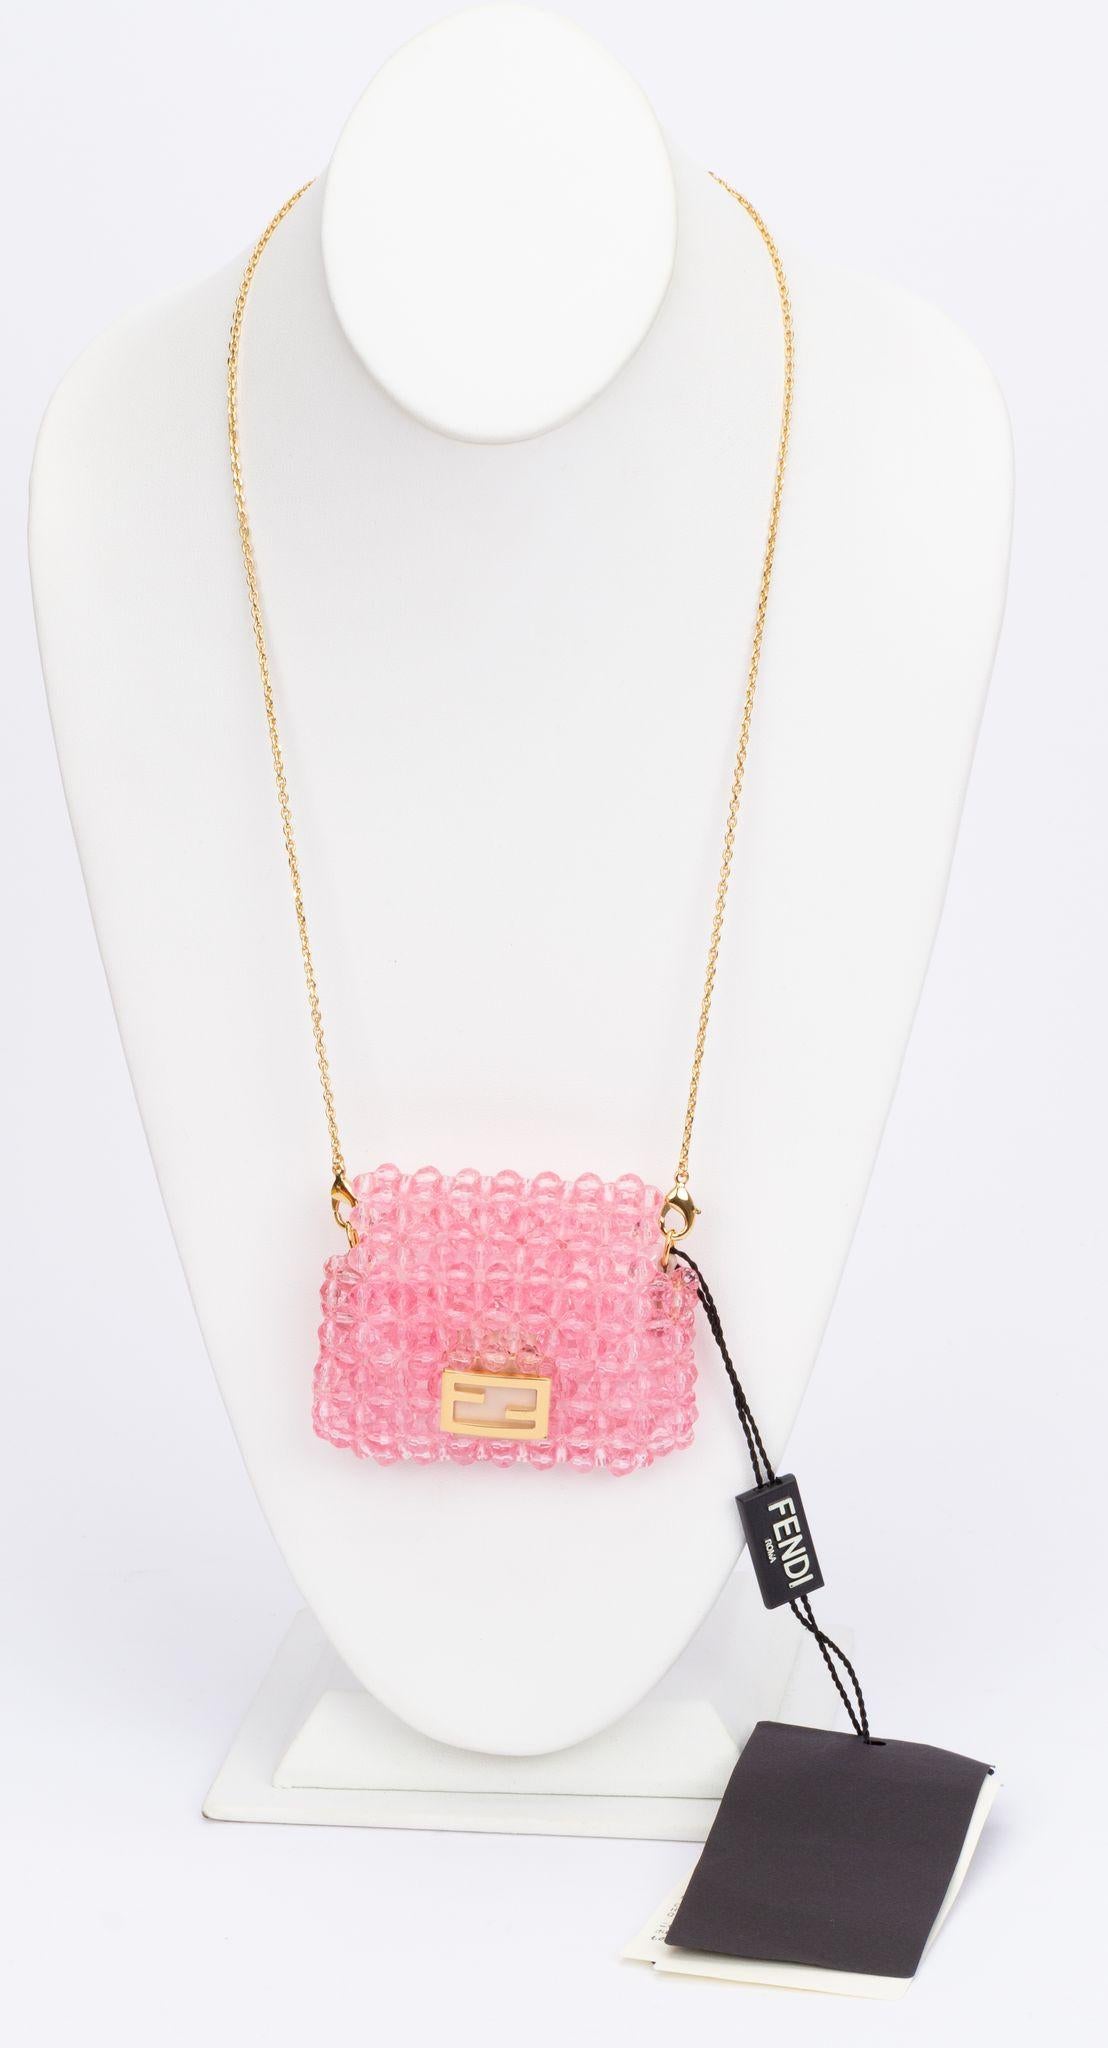 Fendi micro beaded baguette in pink. It can be attached to a larger bag or be worn at the wrist, waist as well as a necklace. It comes with an adjustable and detachable chain (drop up to 21